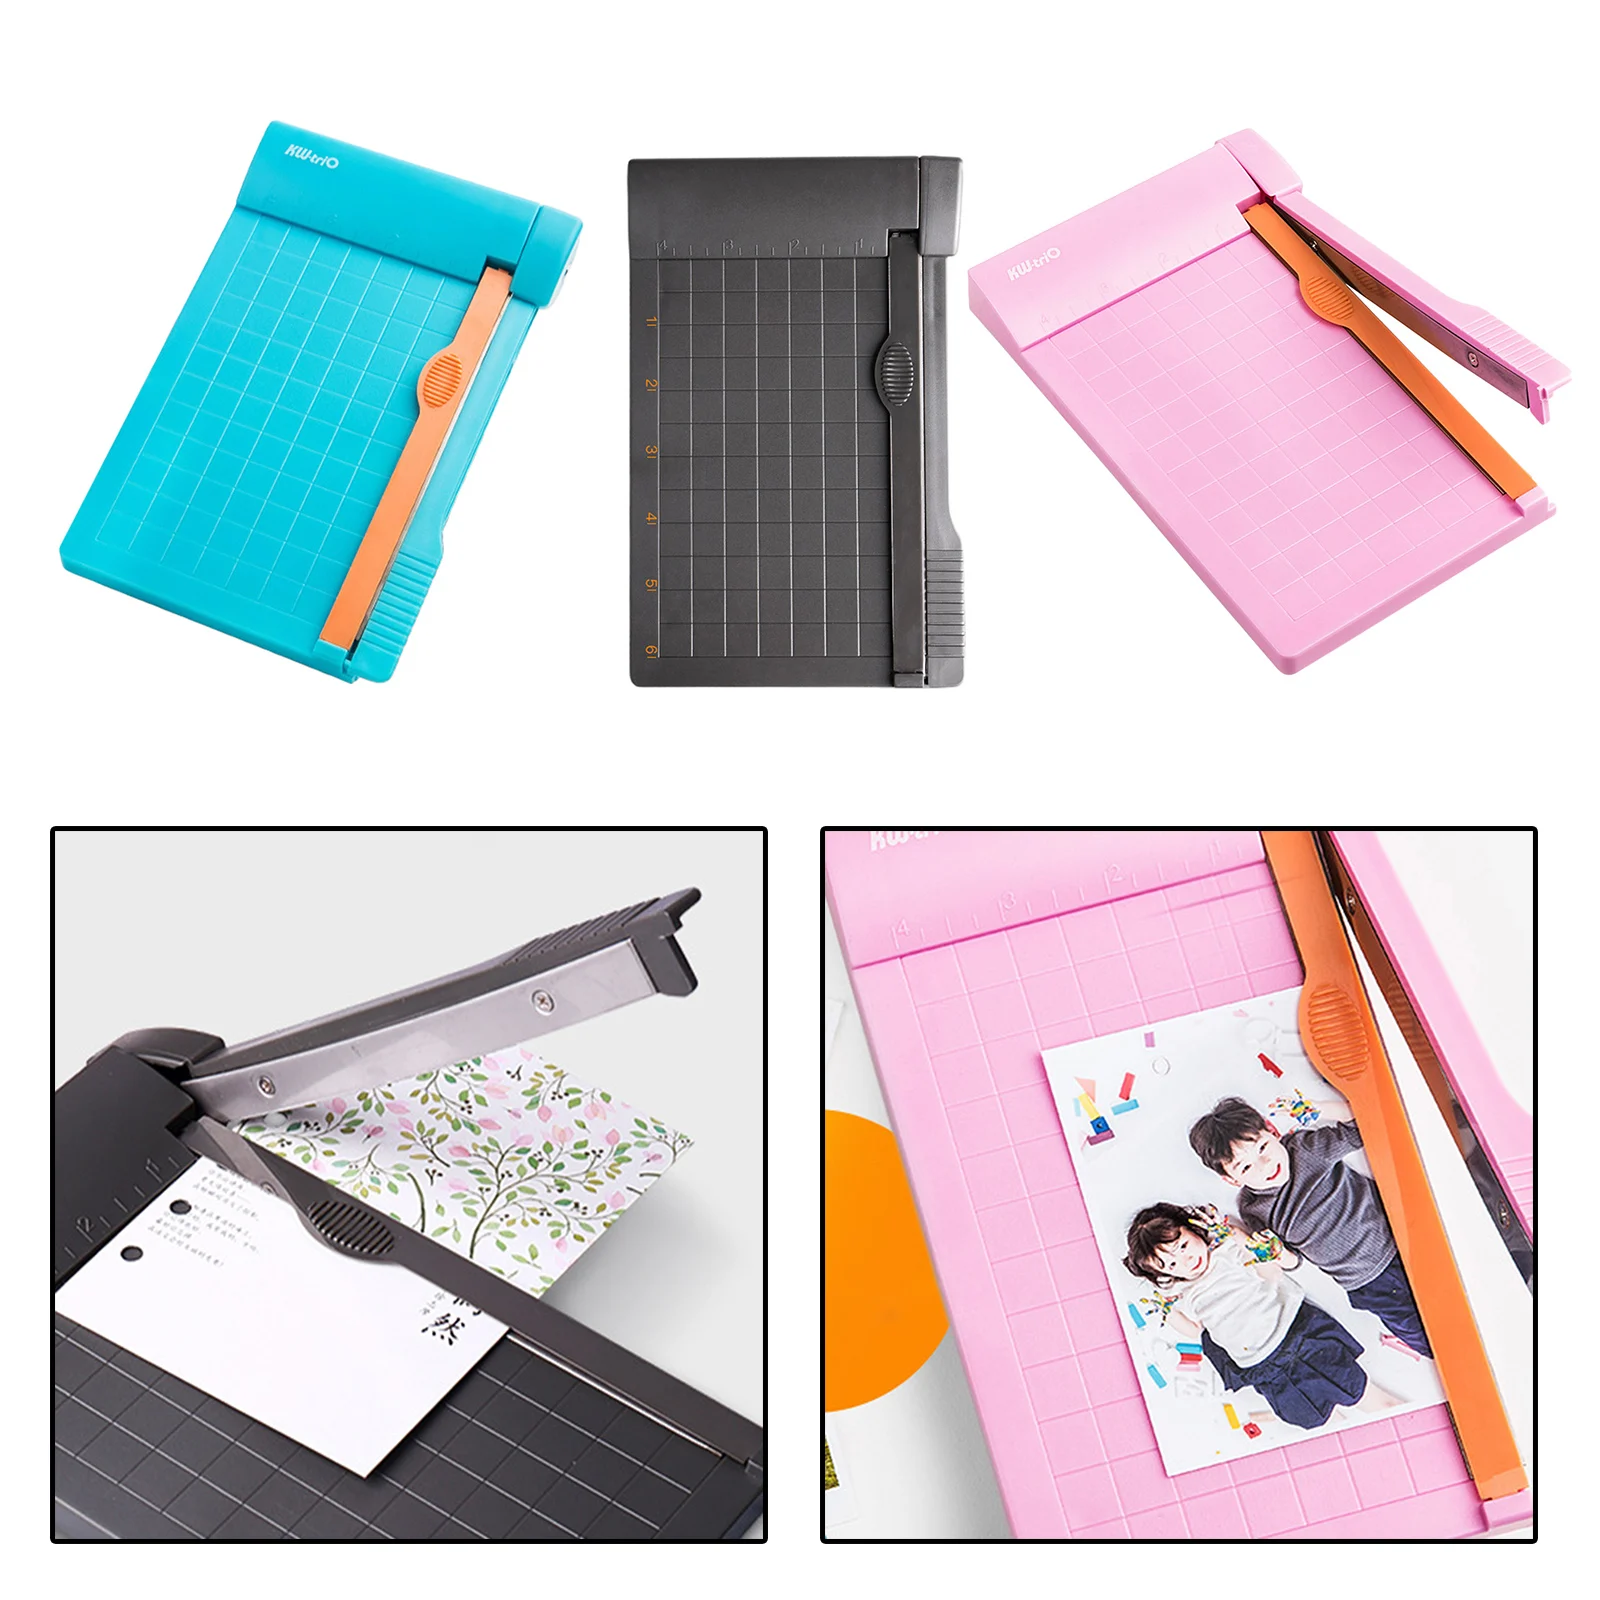 Portable Precision 6inch Paper Trimmer Cutting Board Guillotine Photo Cutter Photo Coupon Laminated Paper Craft Project Office